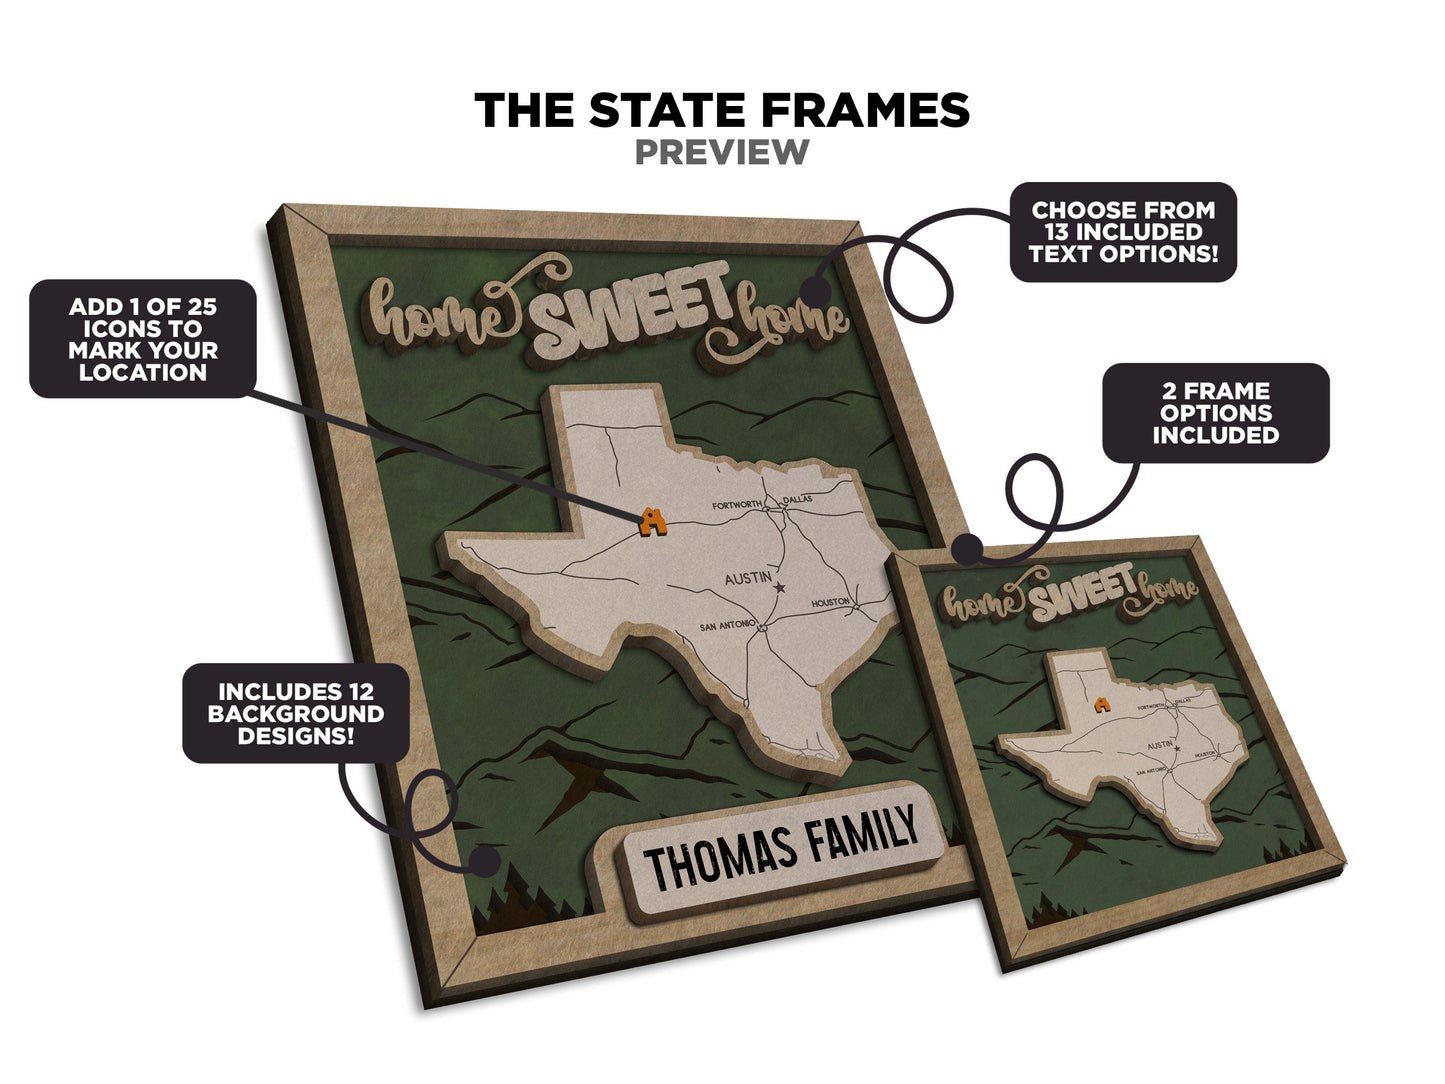 The South Carolina State Frame - 13 text options, 12 backgrounds, 25 icons Included - Make over 7,500 designs - Glowforge & Lightburn Tested